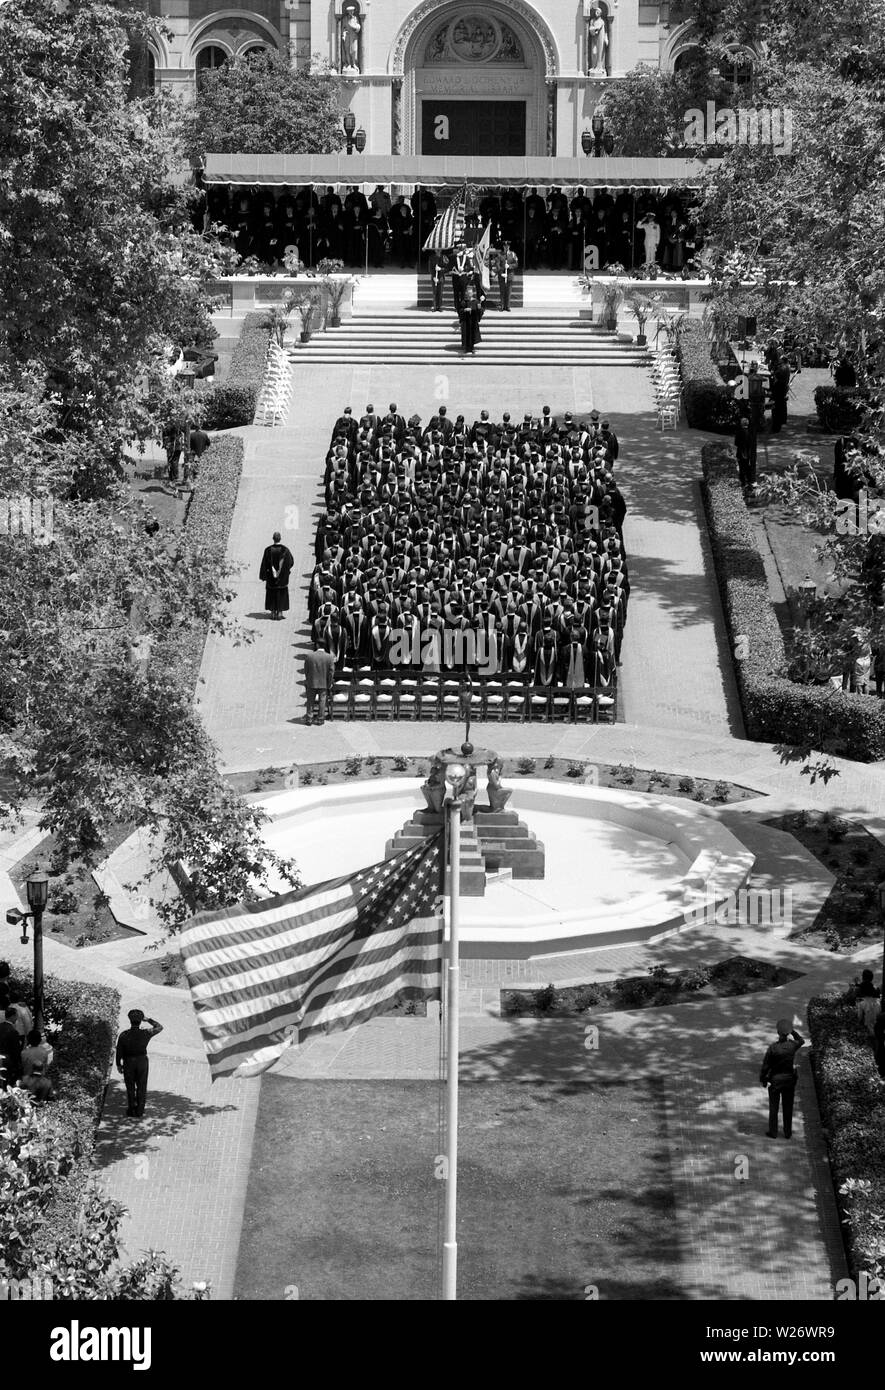 Aerial view of graduation day ceremony at University of Southern California Sorority, USA 1964 Stock Photo